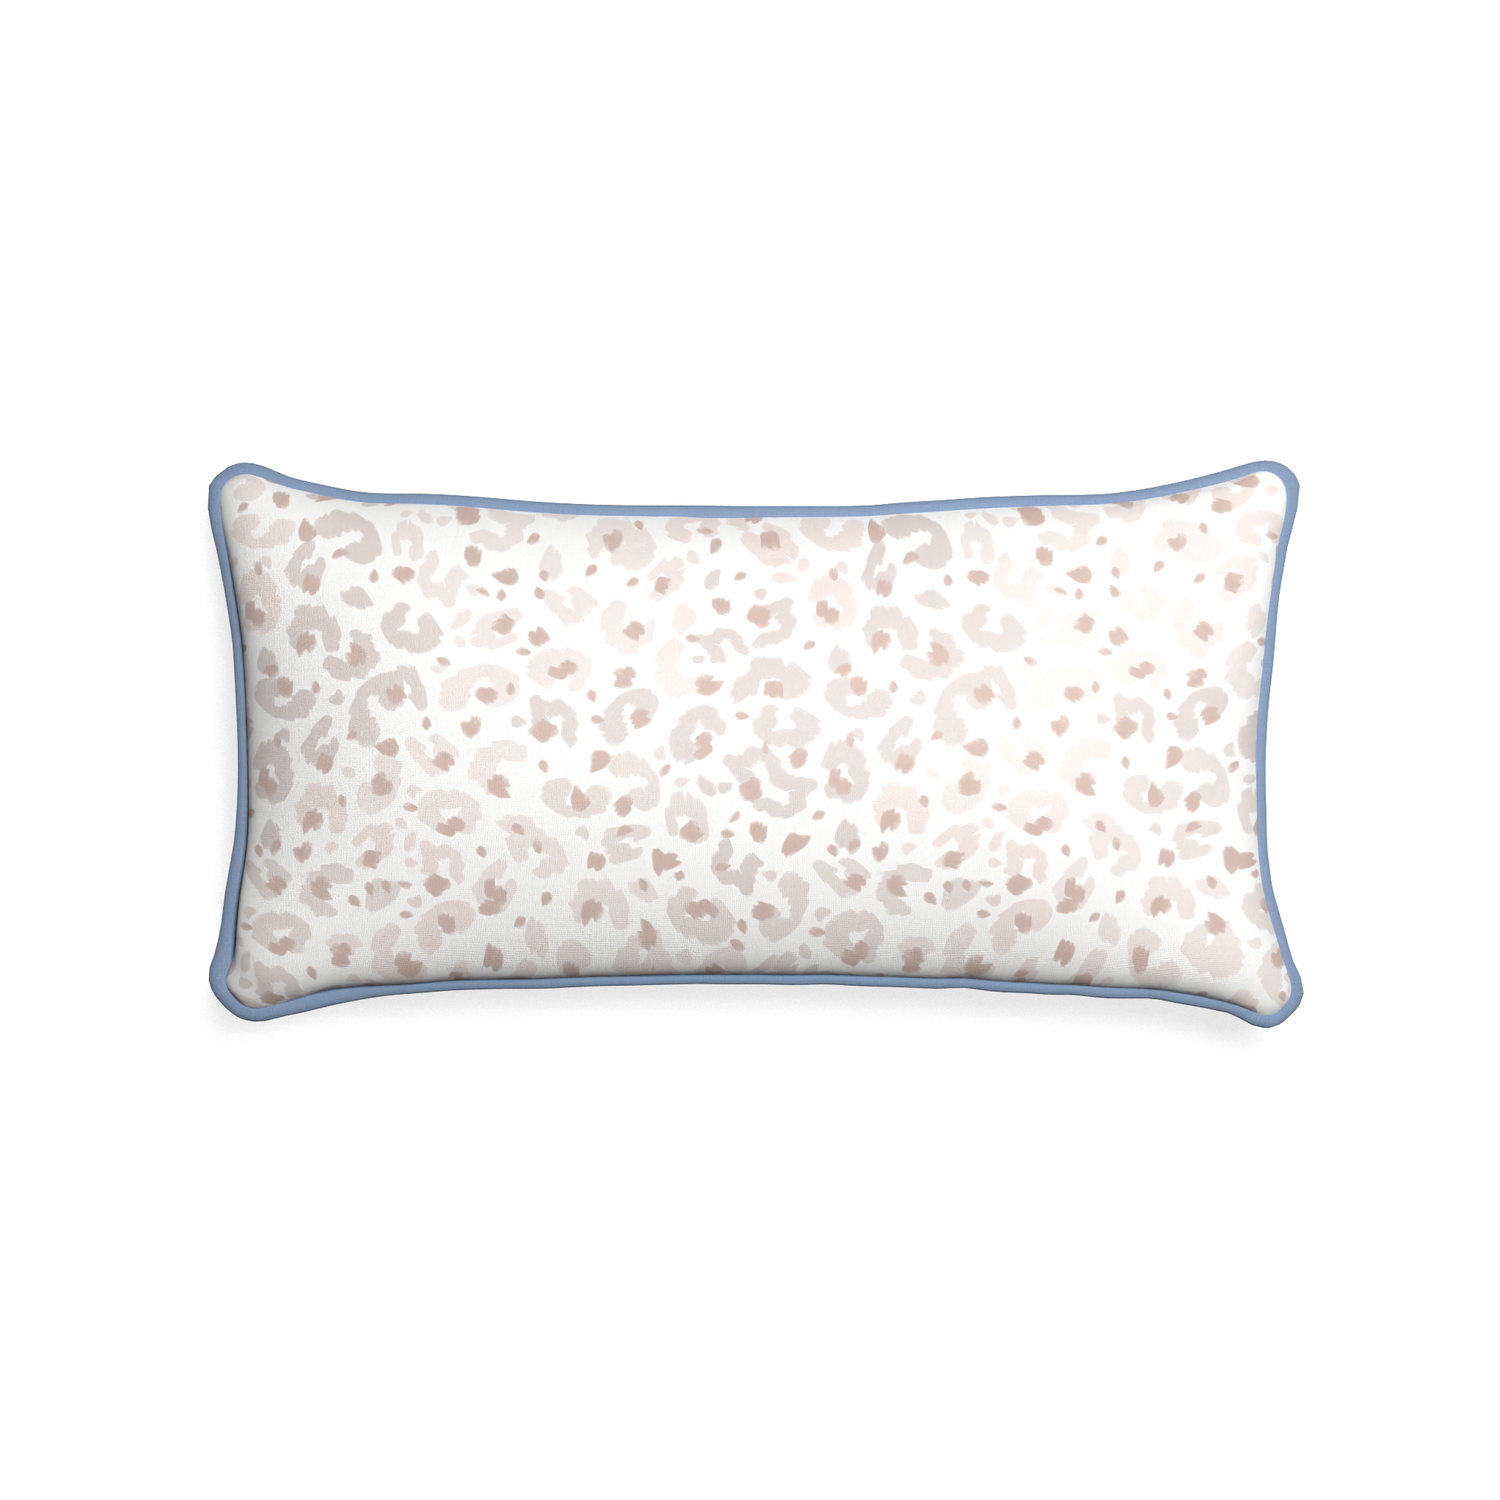 Midi-lumbar rosie custom beige animal printpillow with sky piping on white background